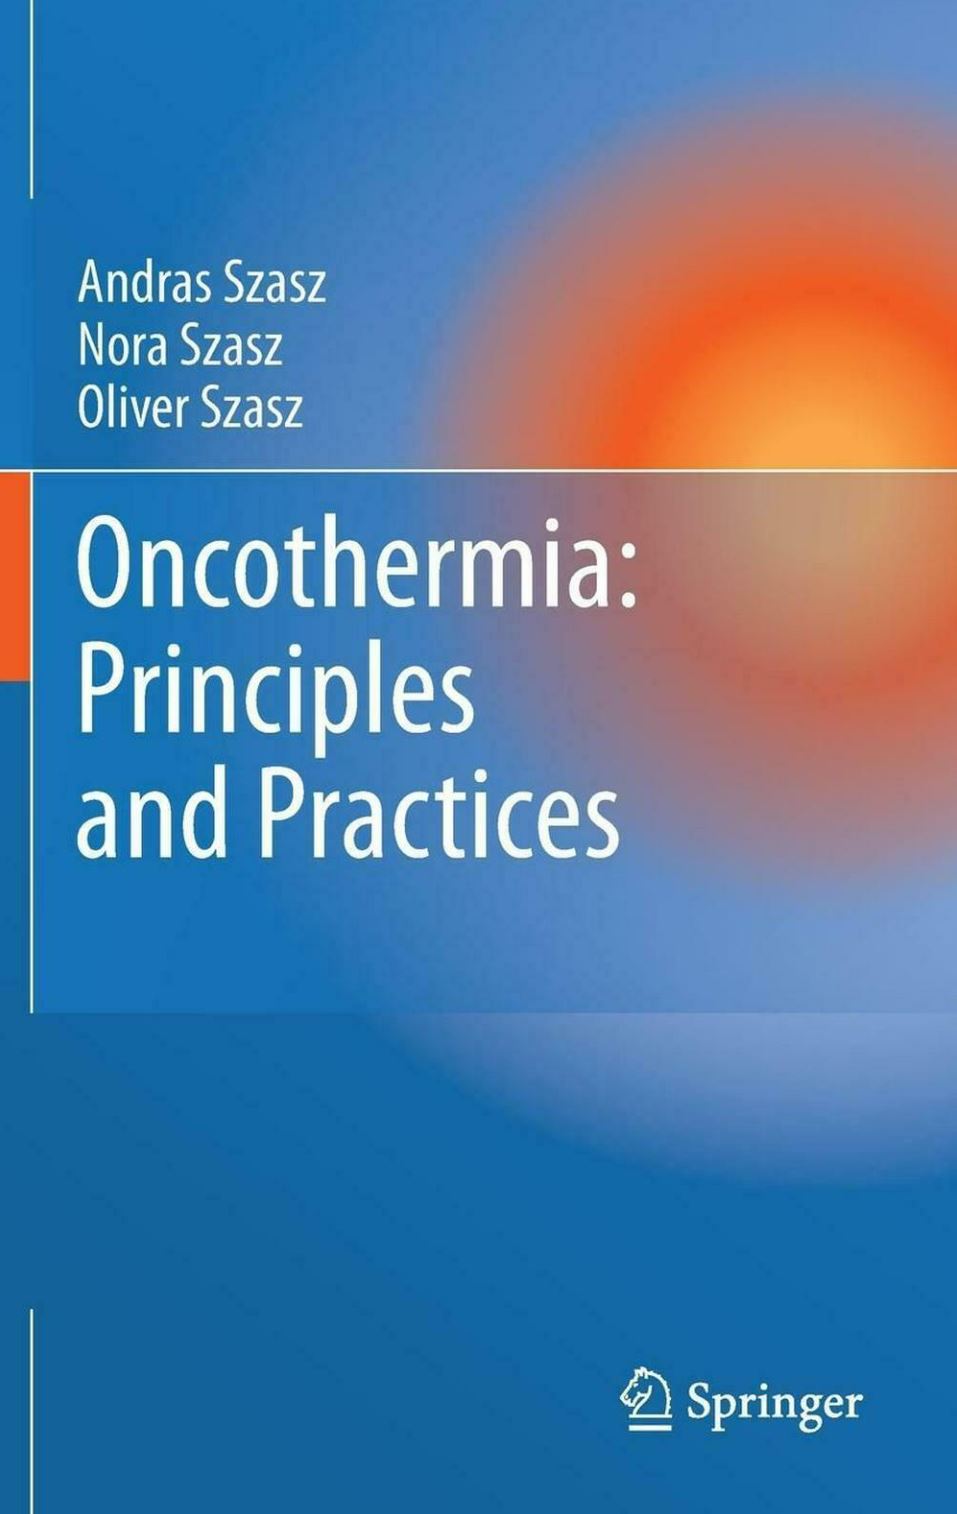 Principles and Practices book cover